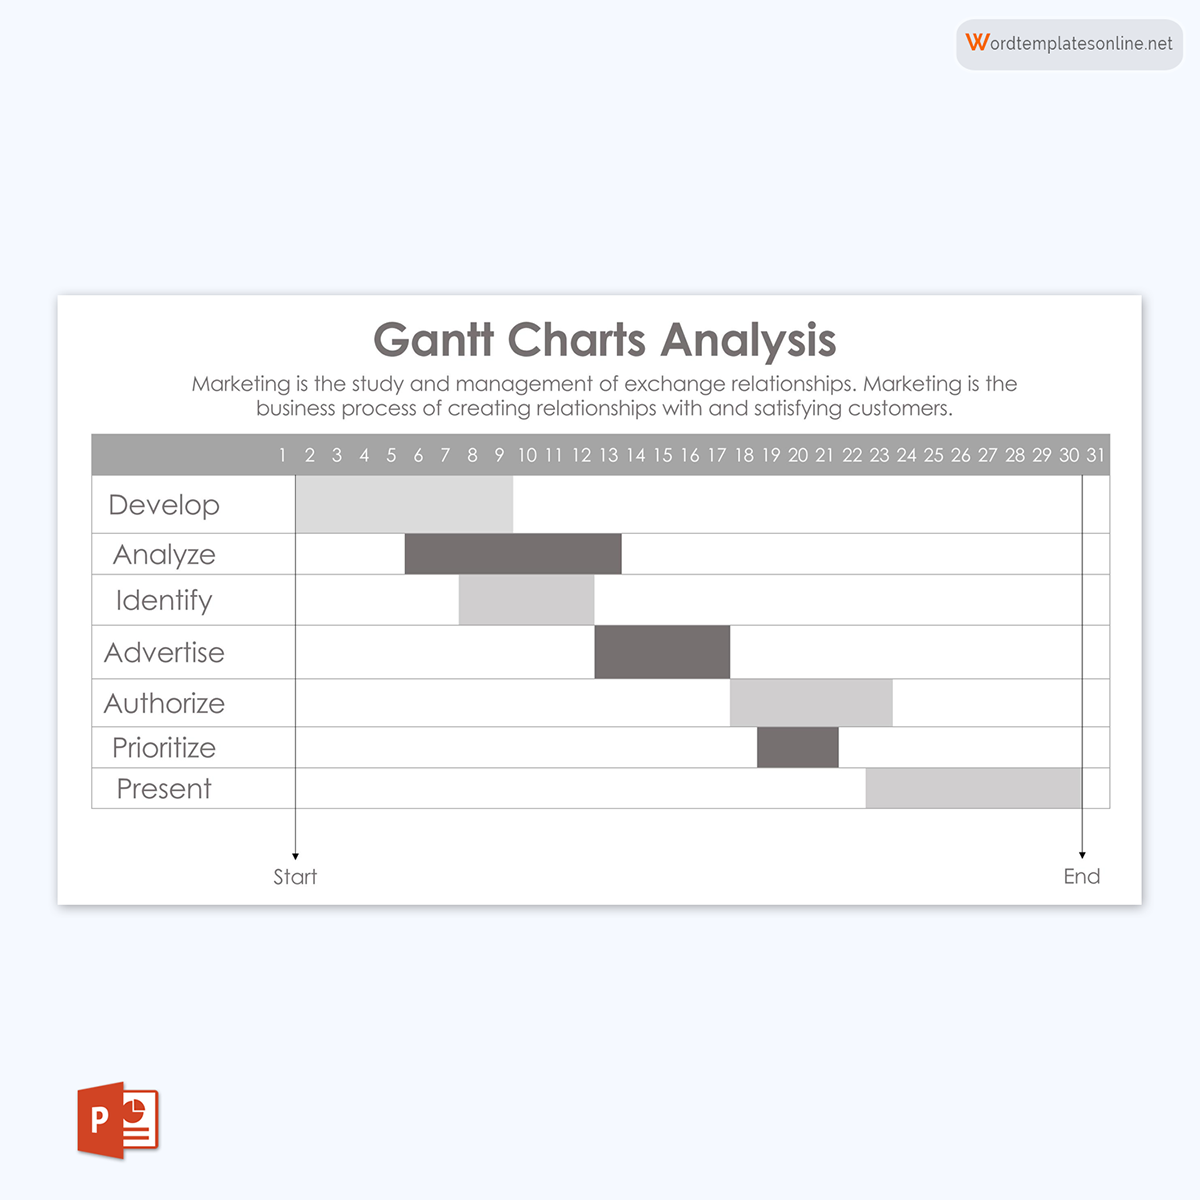 gantt chart exercises with answers